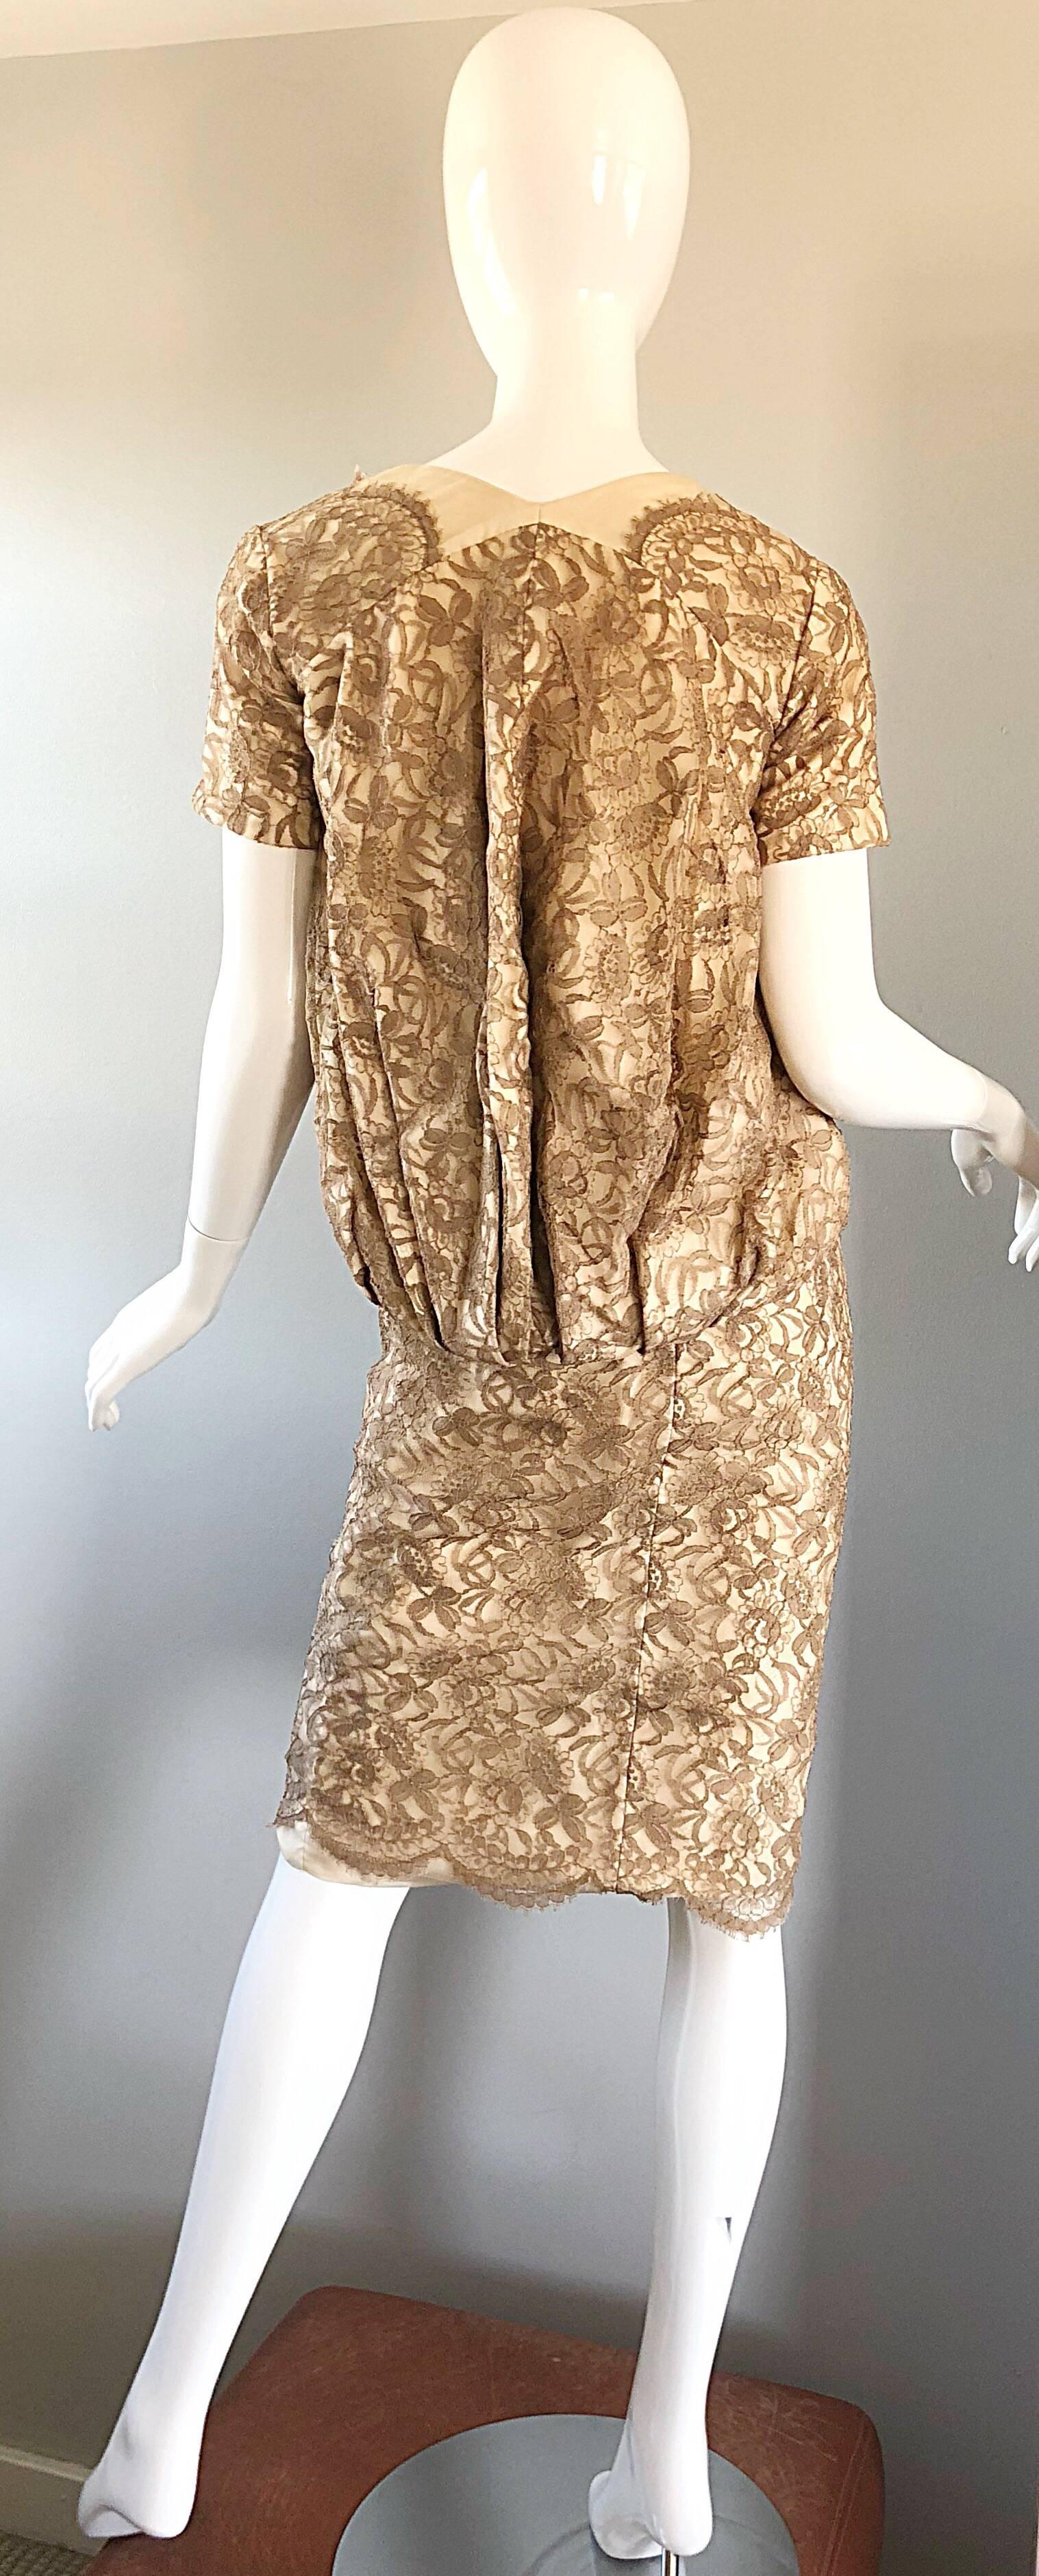 Sensational 1950s Demi Couture Nude Taupe Tan French Lace 50s Dress + Bolero For Sale 1